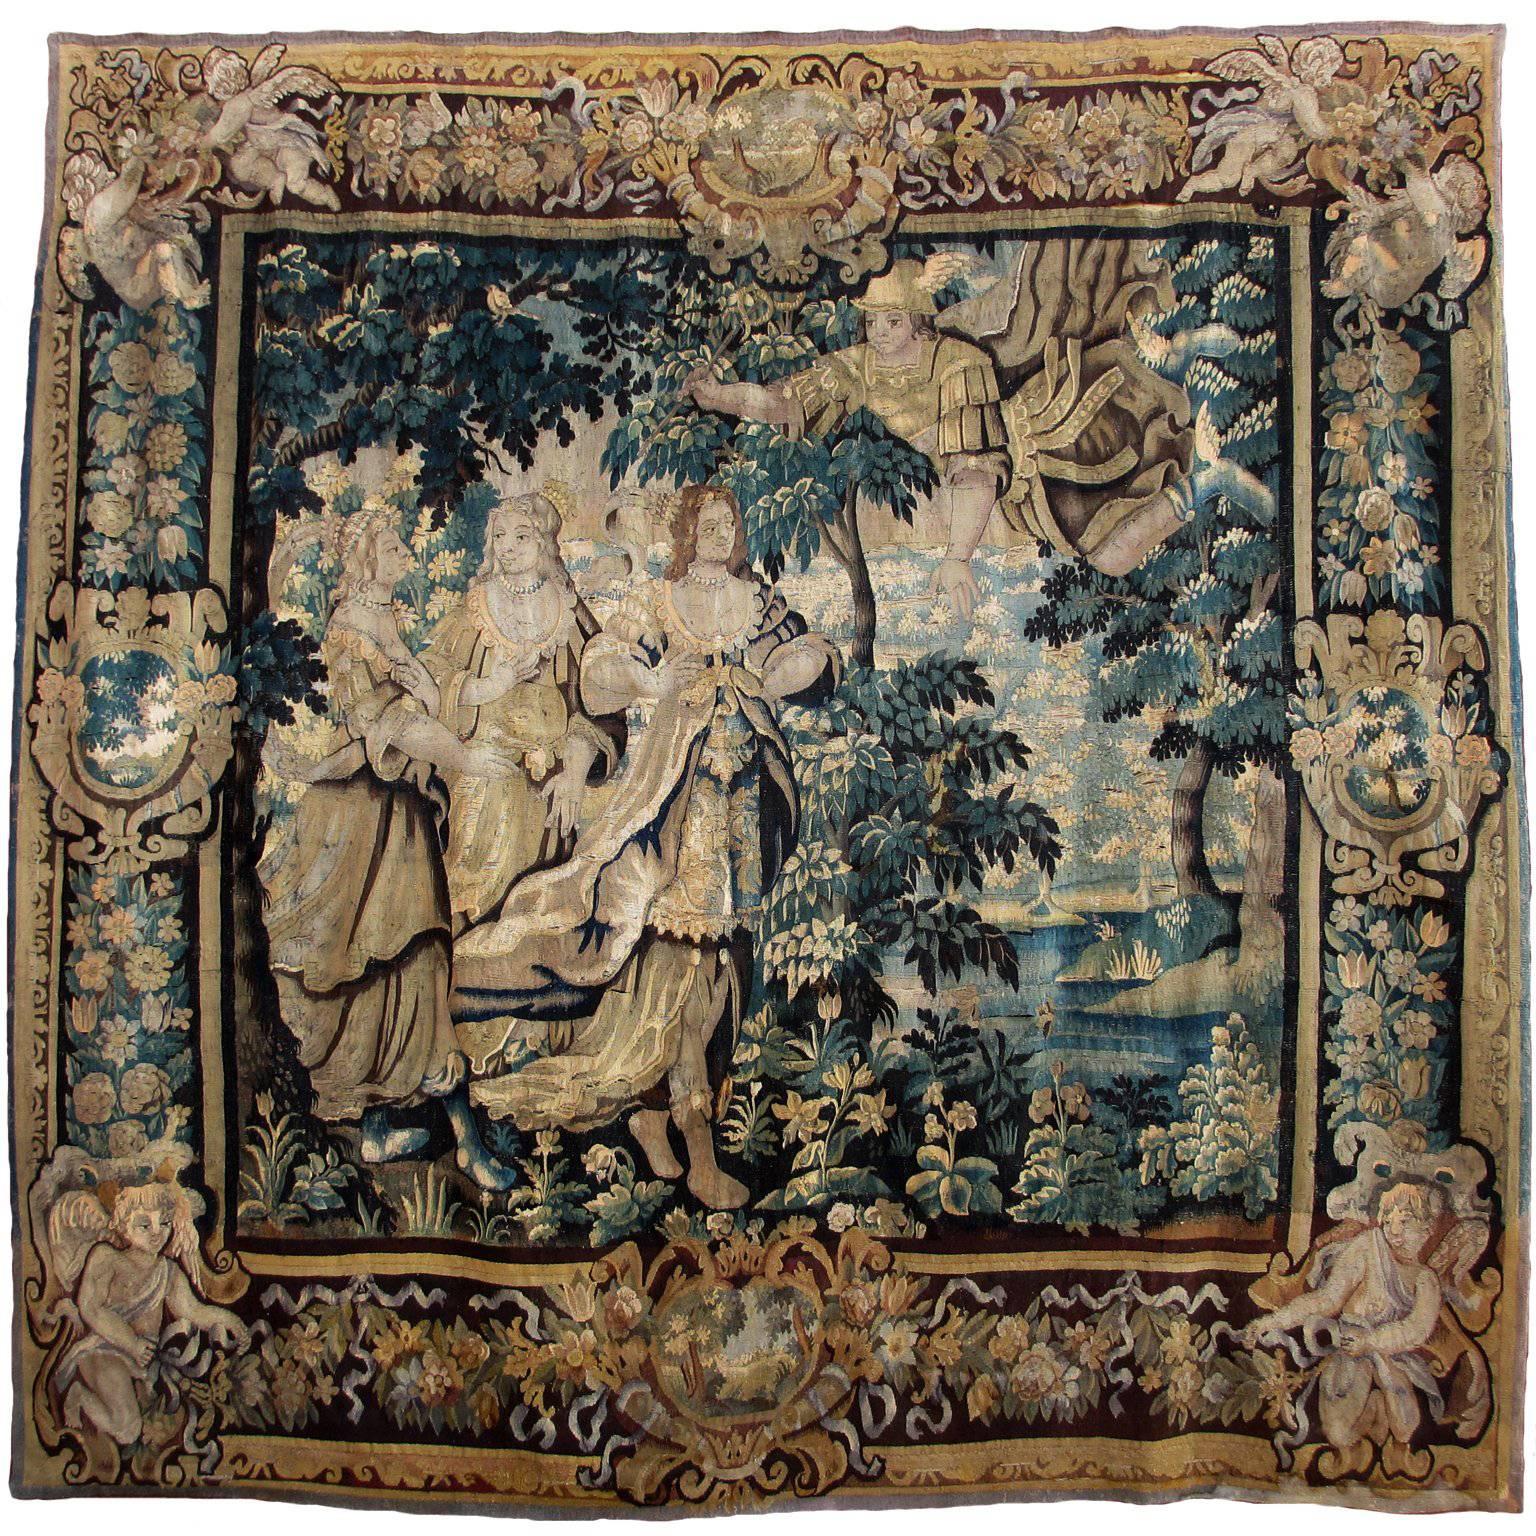 Franco-Flemish 18th Century Figural Tapestry Allegorical to "Triumph & Love"